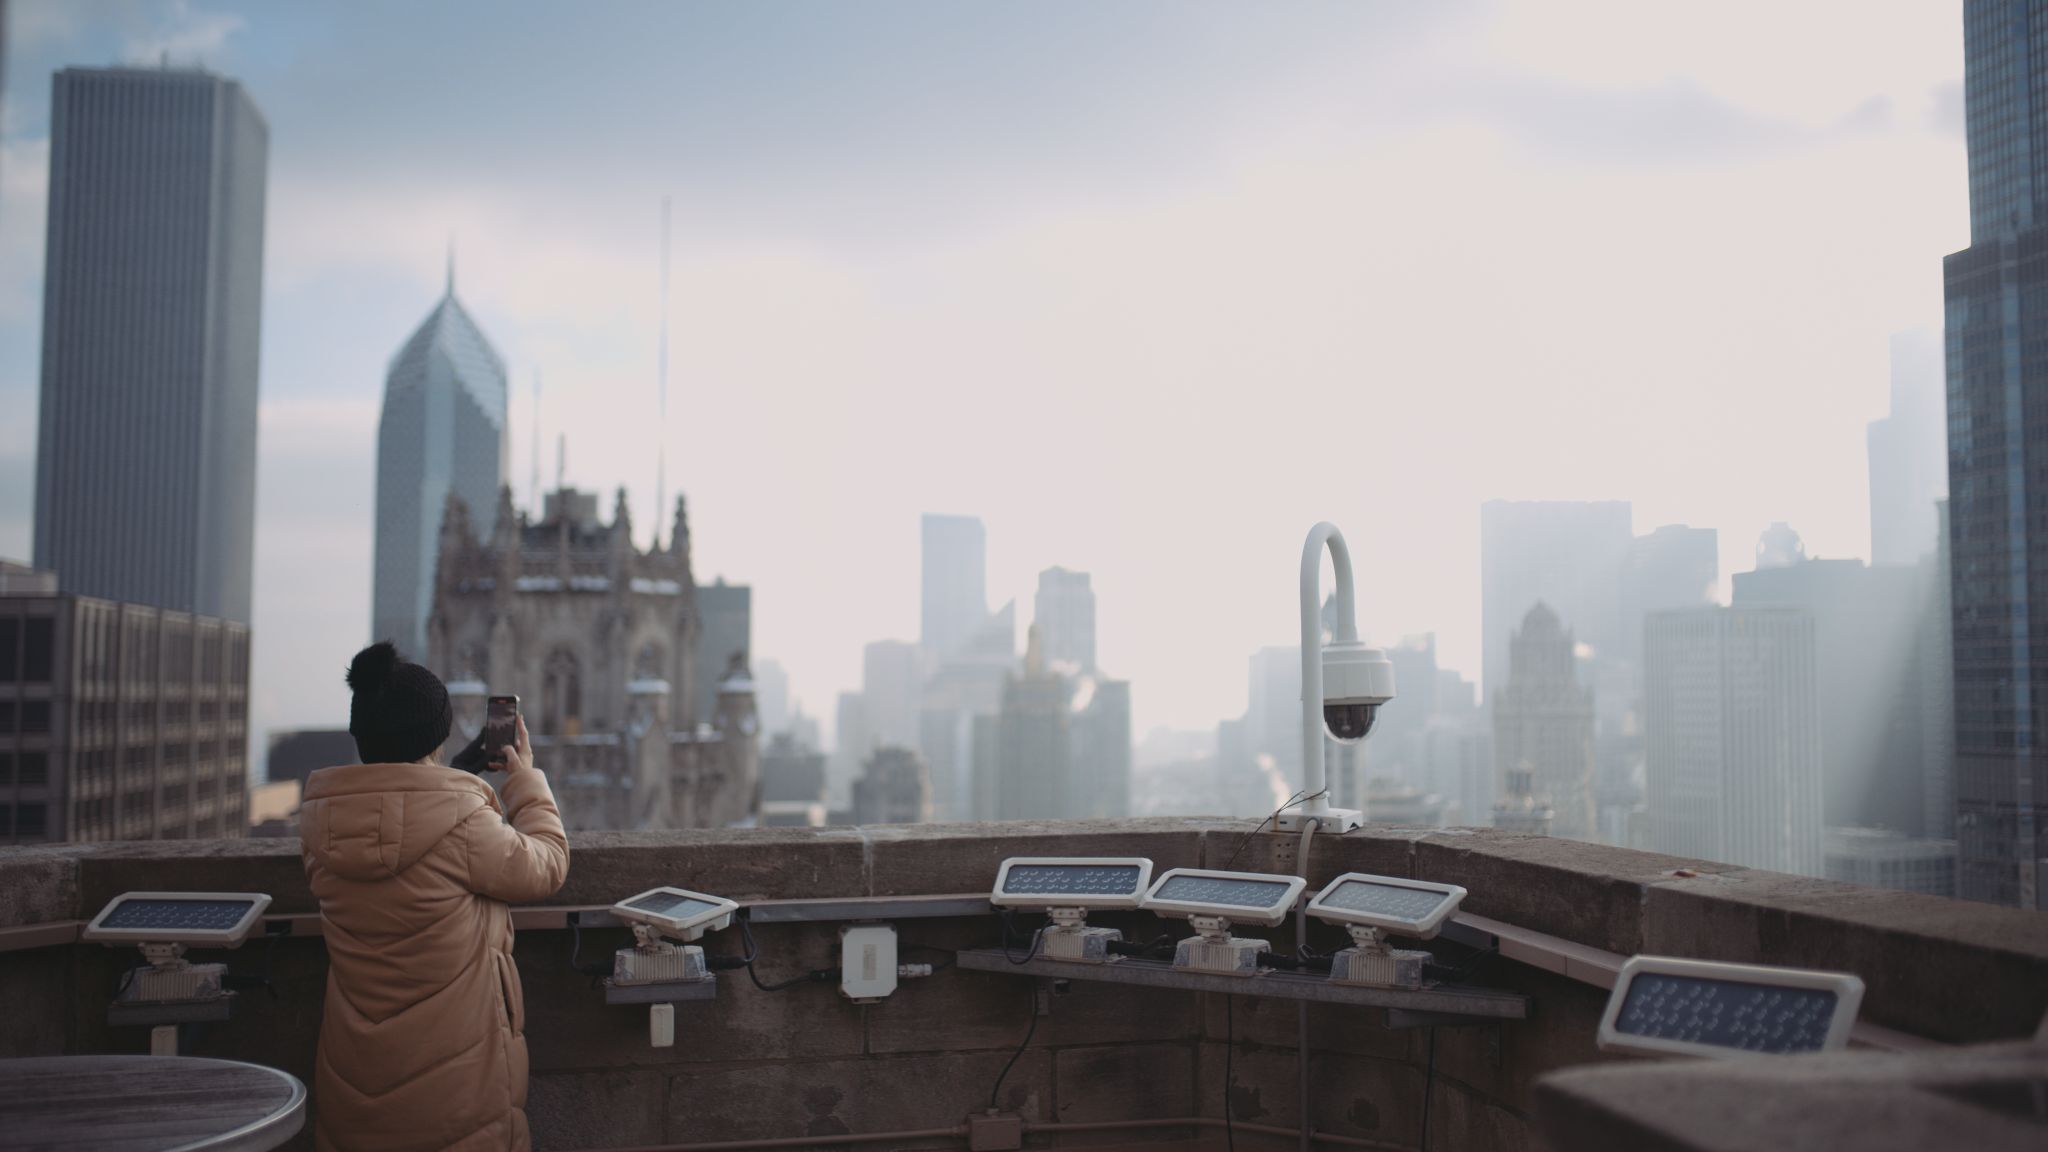 Woman in beige puffy jacket and black snow cap facing away from camera taking a picture of a skyline with her phone camera.